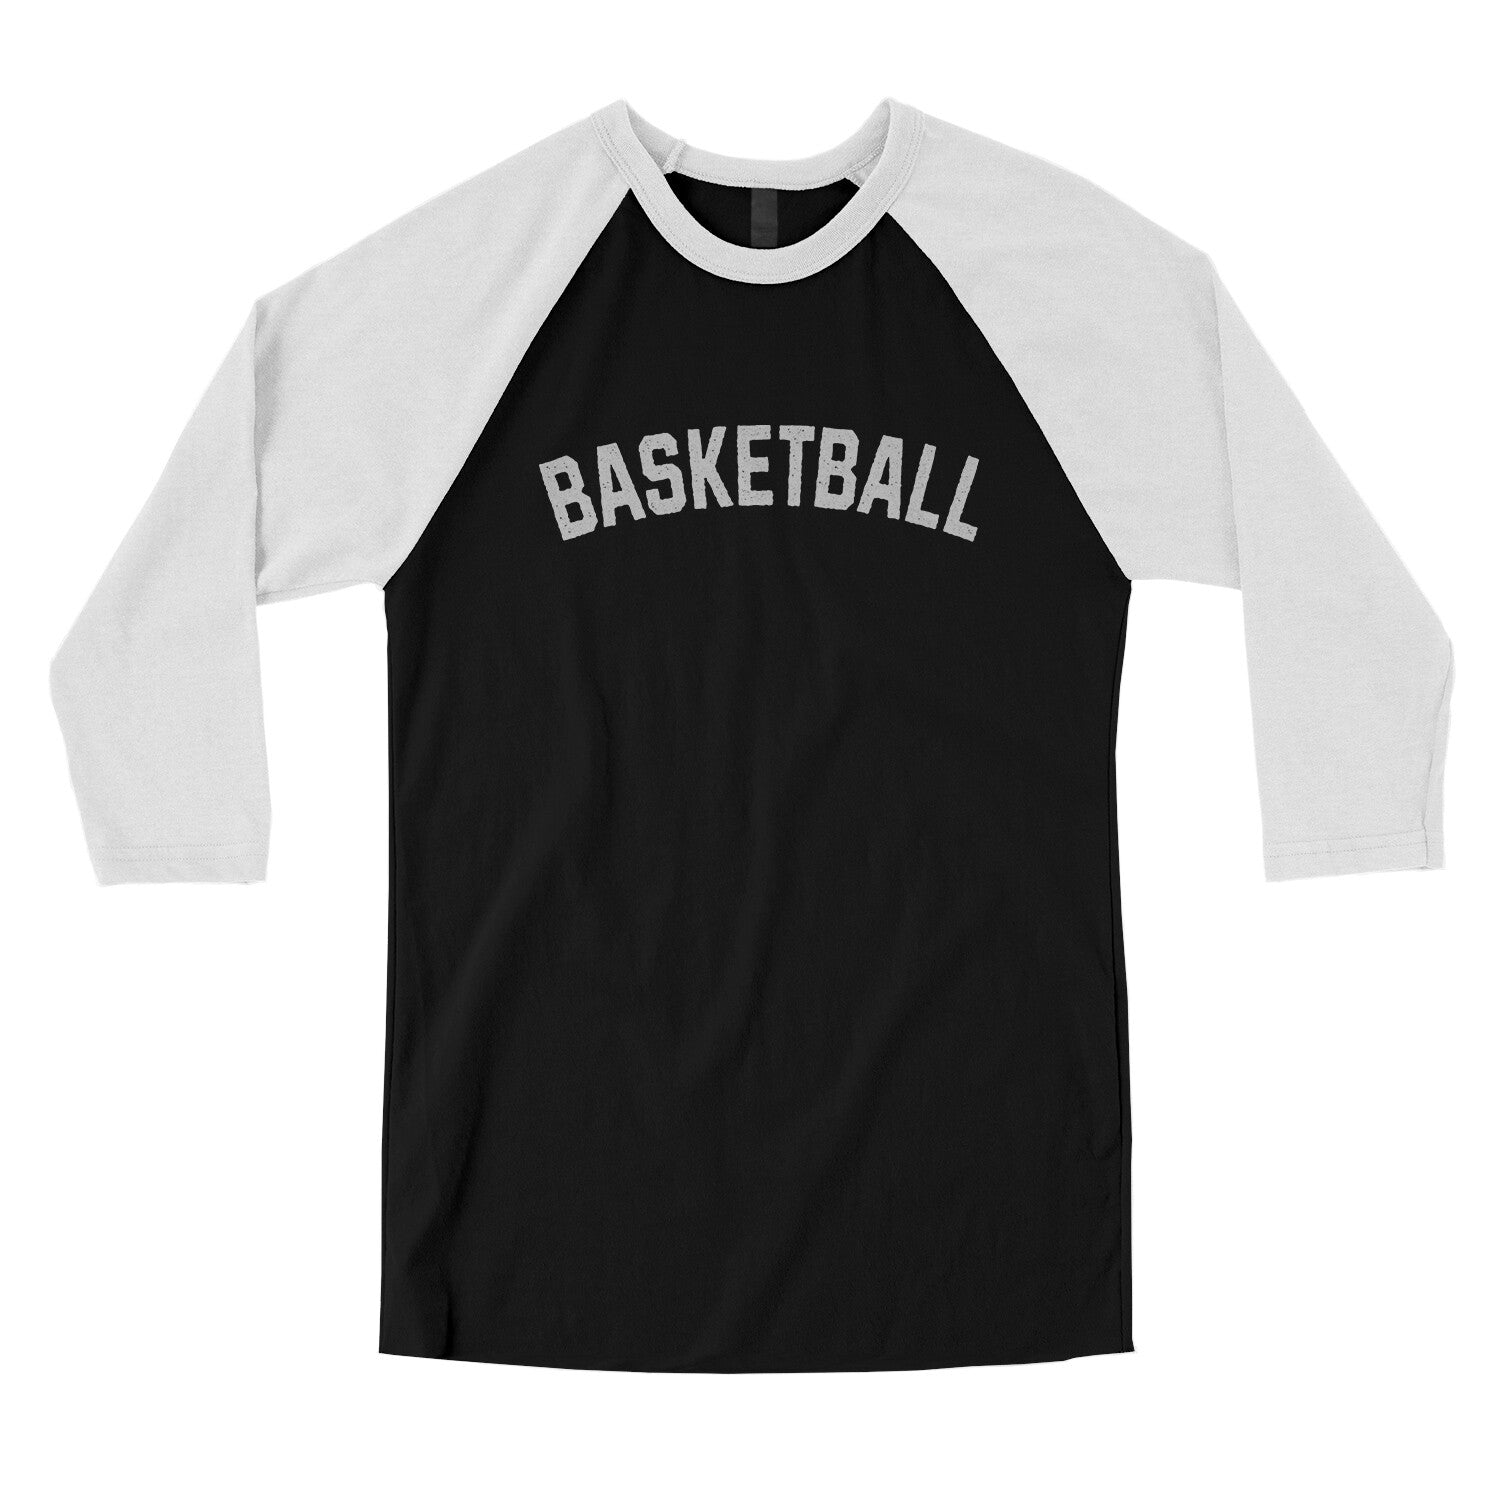 Basketball in Black with White Color